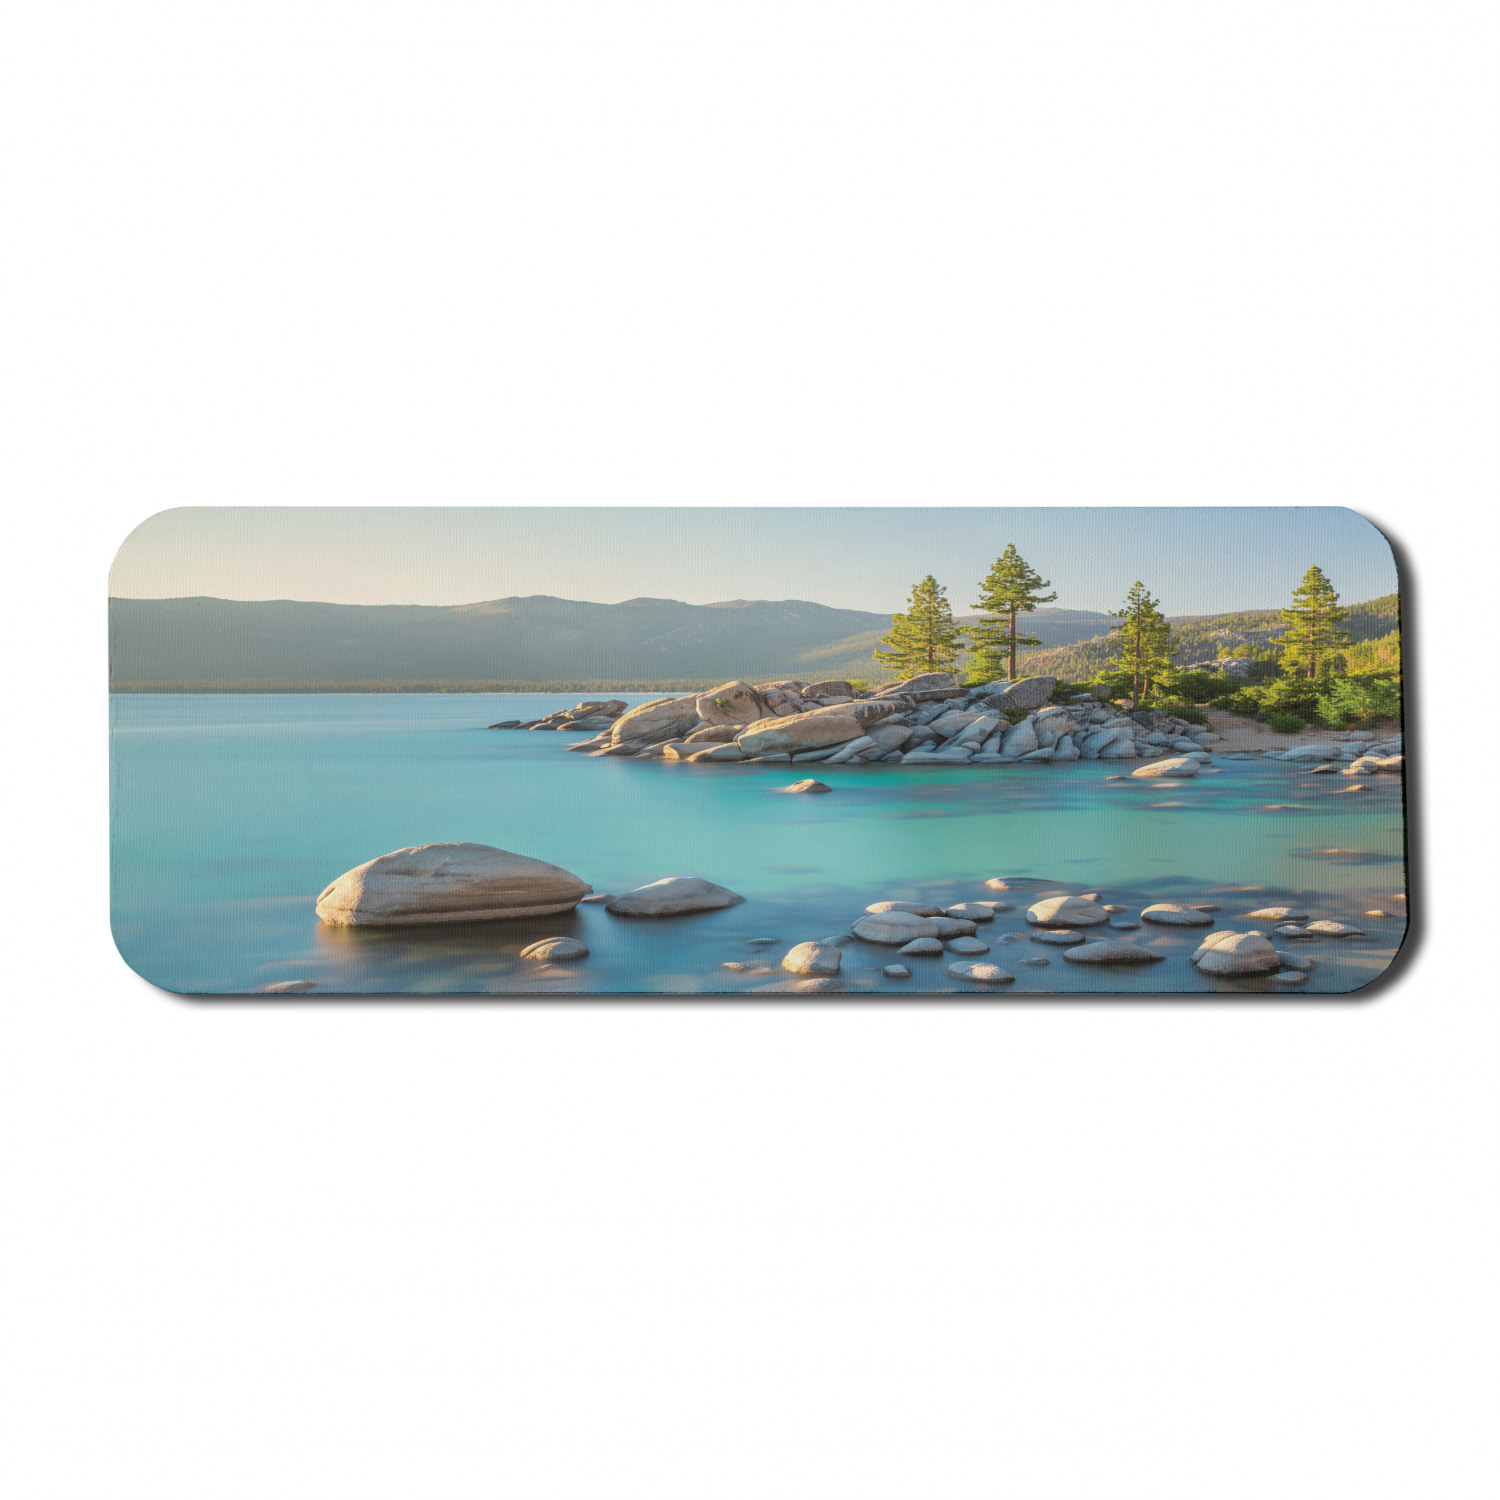 Lake Computer Mouse Pad, Pastoral Spring Time Scenery in Provincial Countryside Lake Beach Shallow Water Theme, Rectangle Non-Slip Rubber Mousepad Large, 31" x 12", Blue Grey, by Ambesonne - image 1 of 2